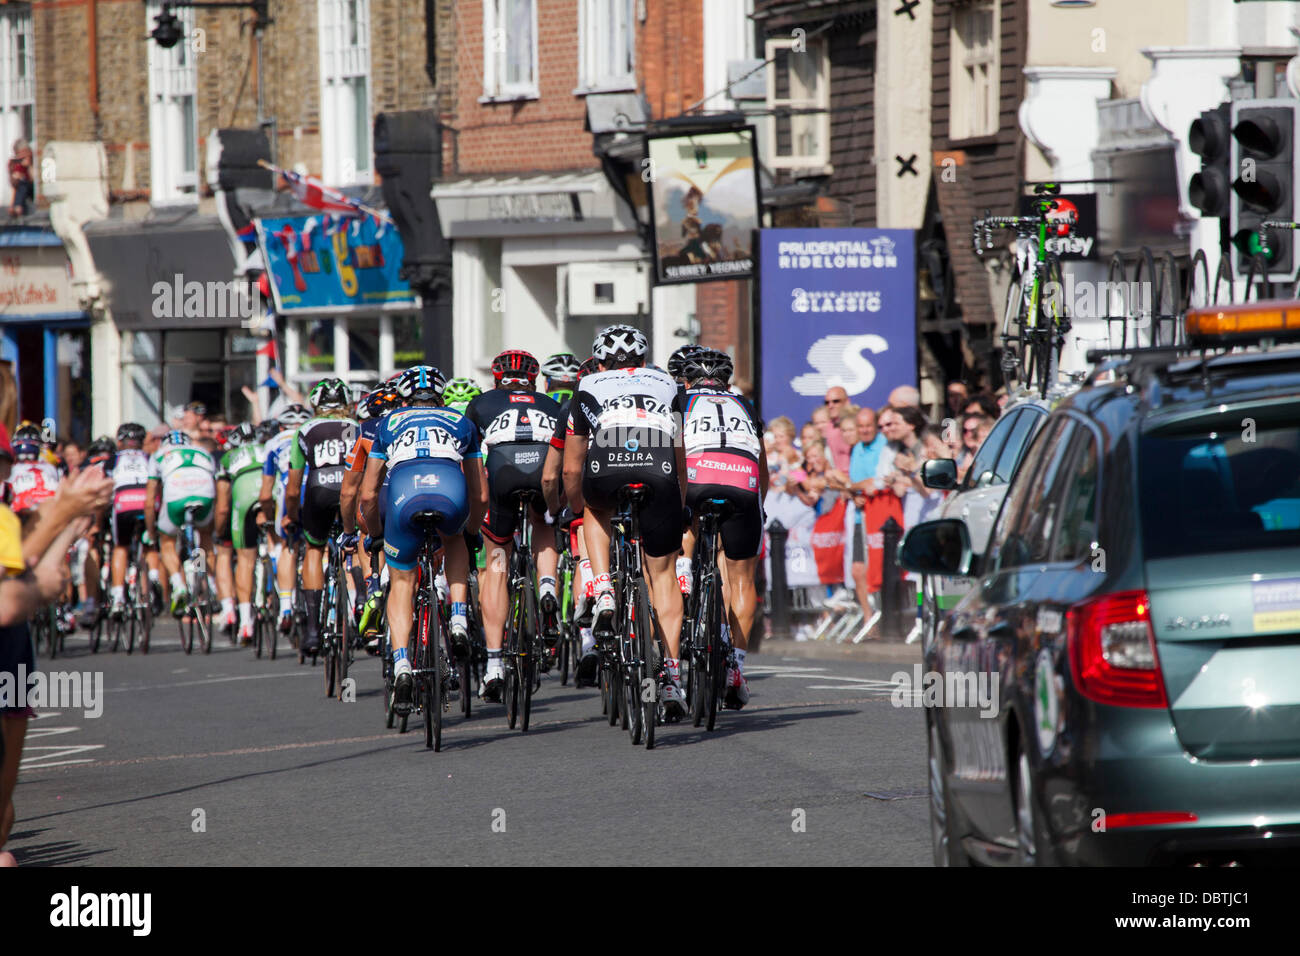 Competitors in the 'Ride London & Surrey' sponsored by Prudential pass down DORKING High Street, Surrey, UK Stock Photo